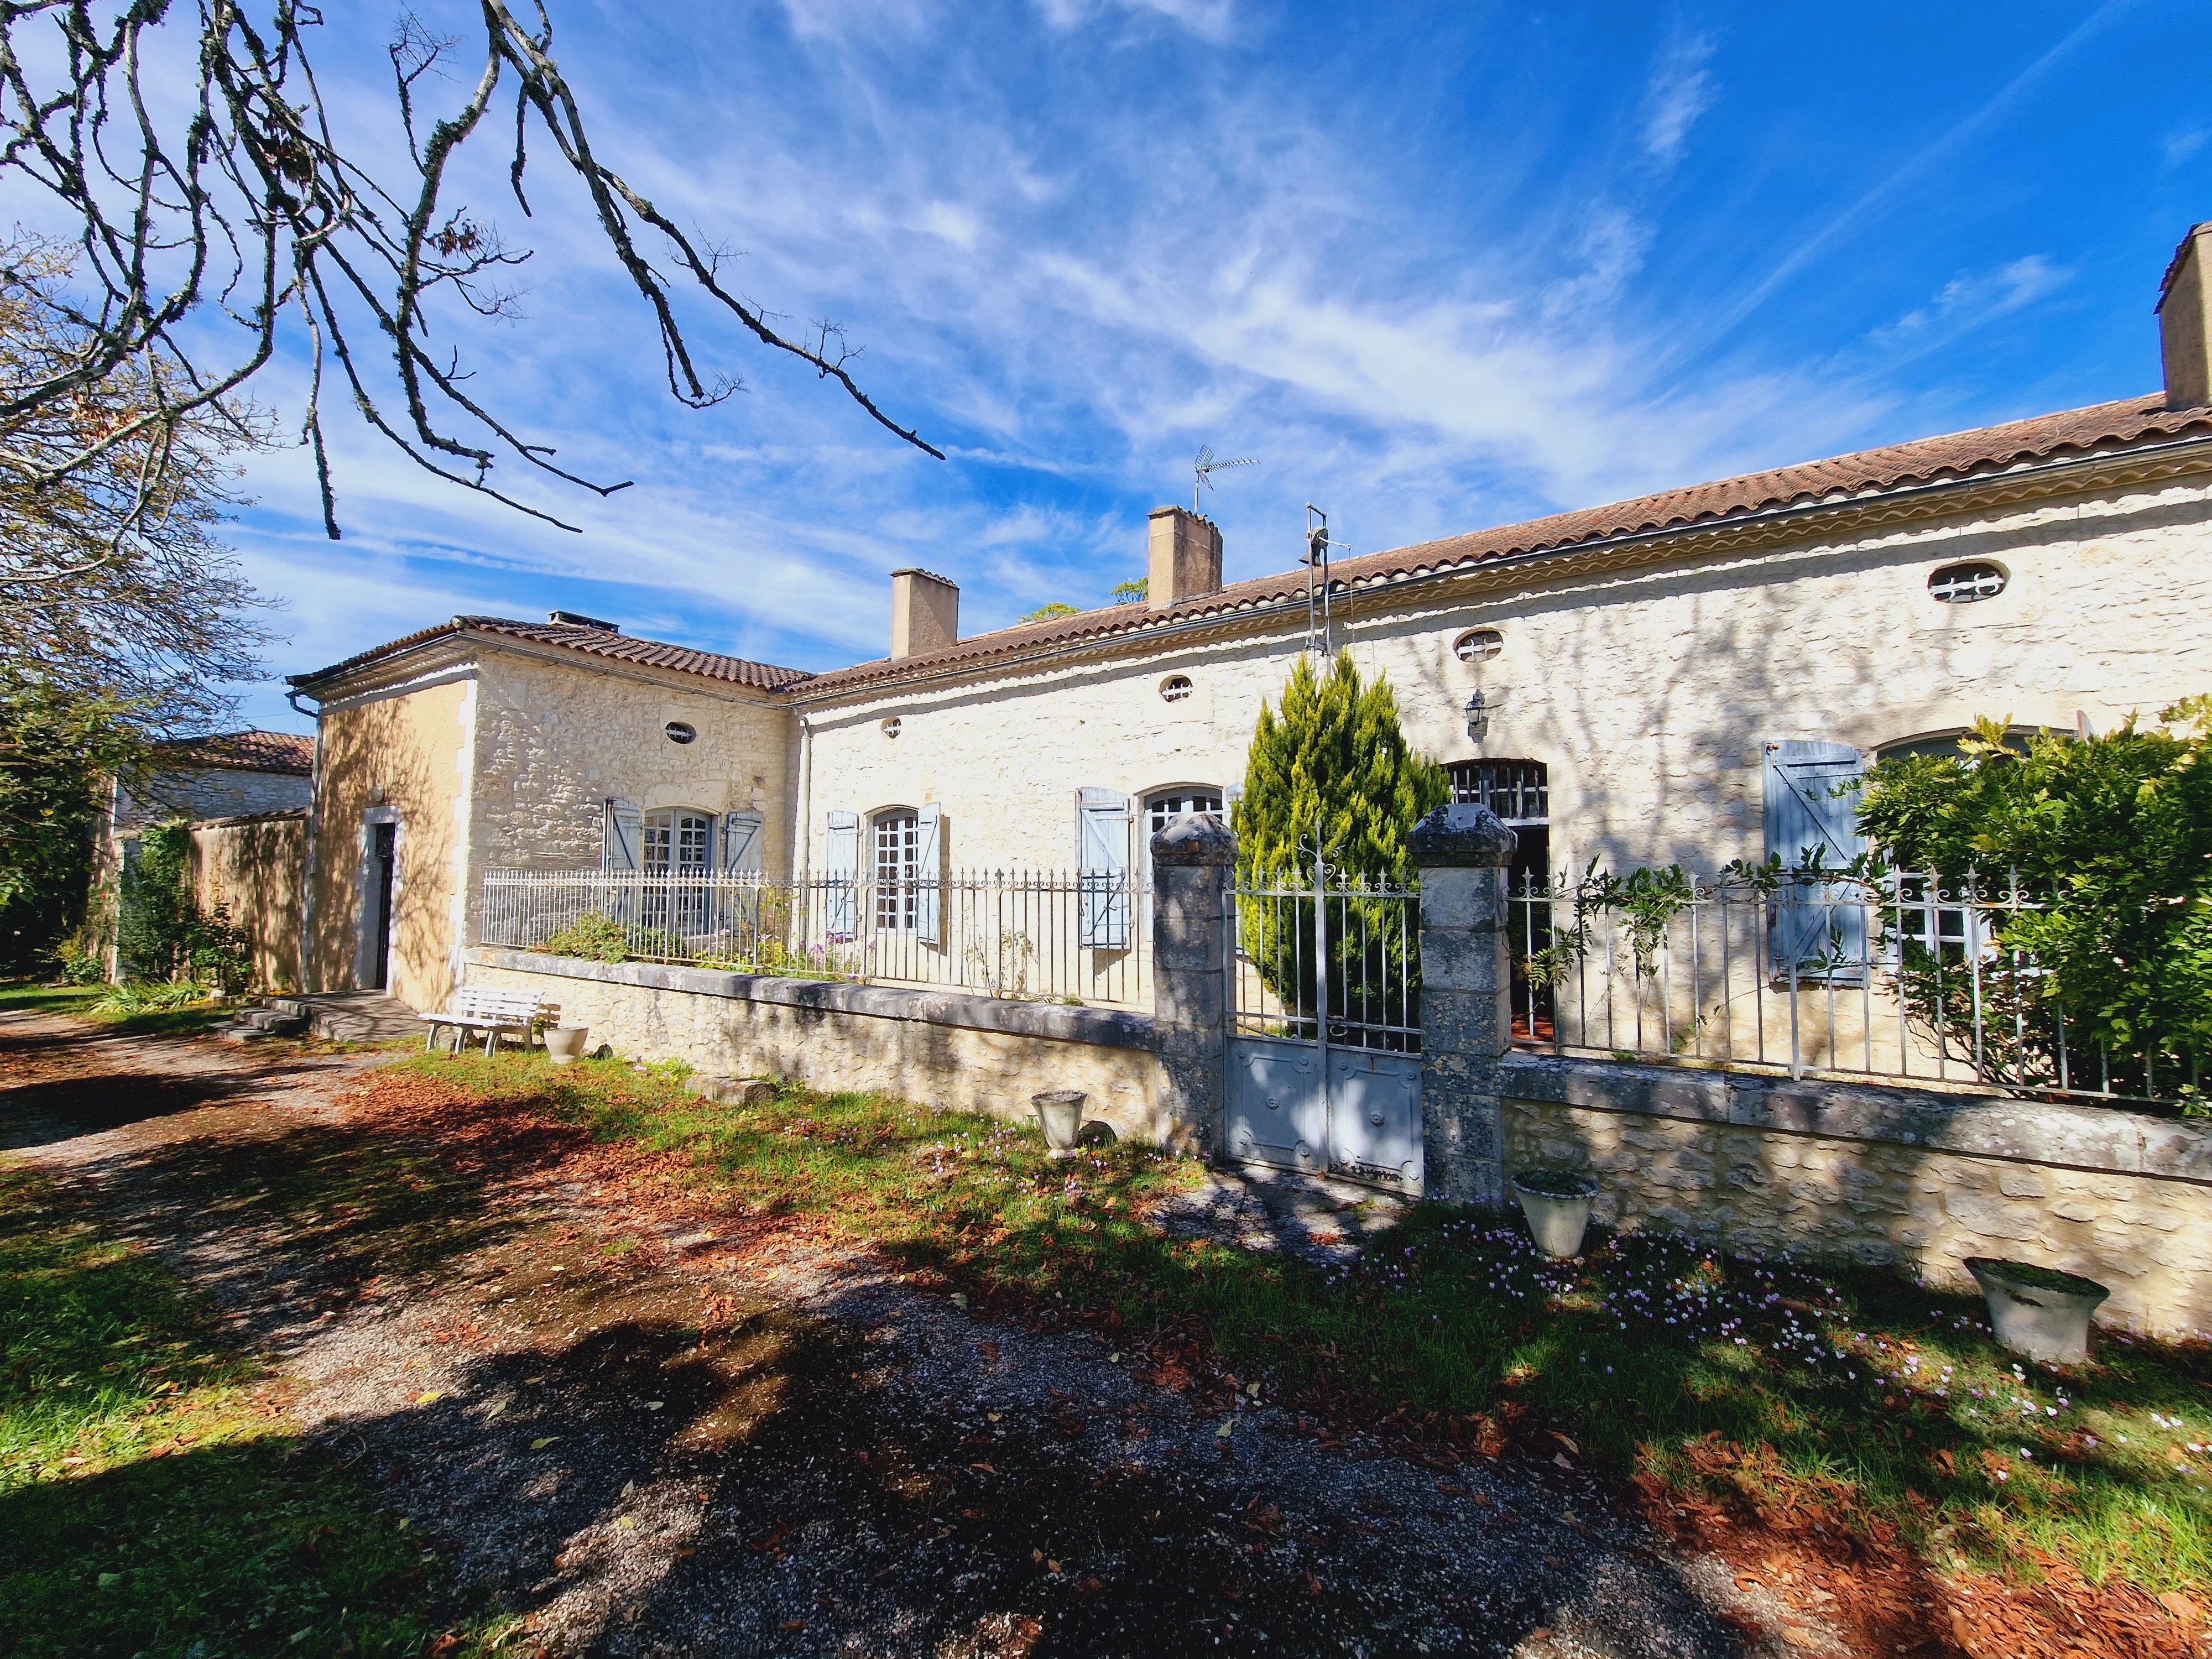 An 18th century chartreuse to update, with separate guest cottages and around 10 hectares